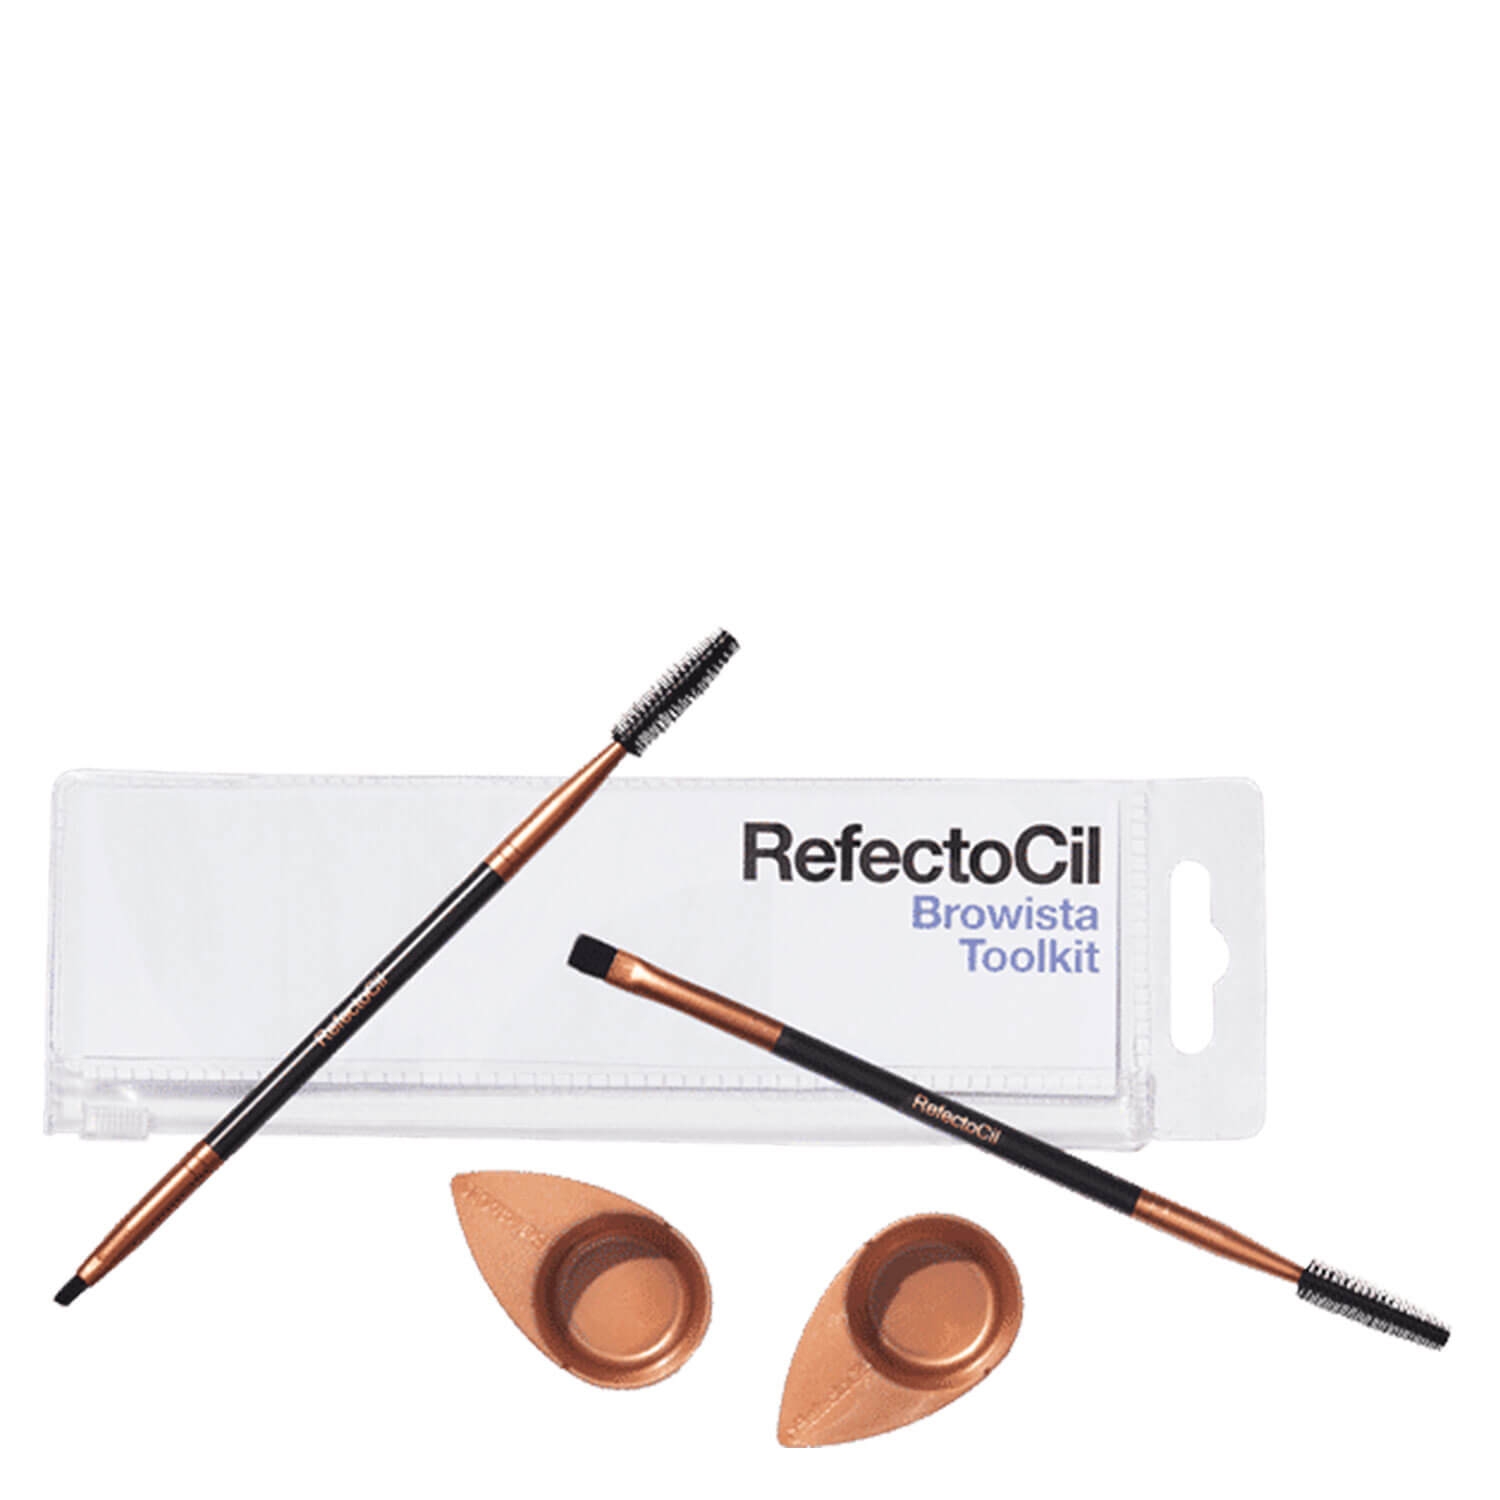 Product image from RefectoCil - Browista Toolkit